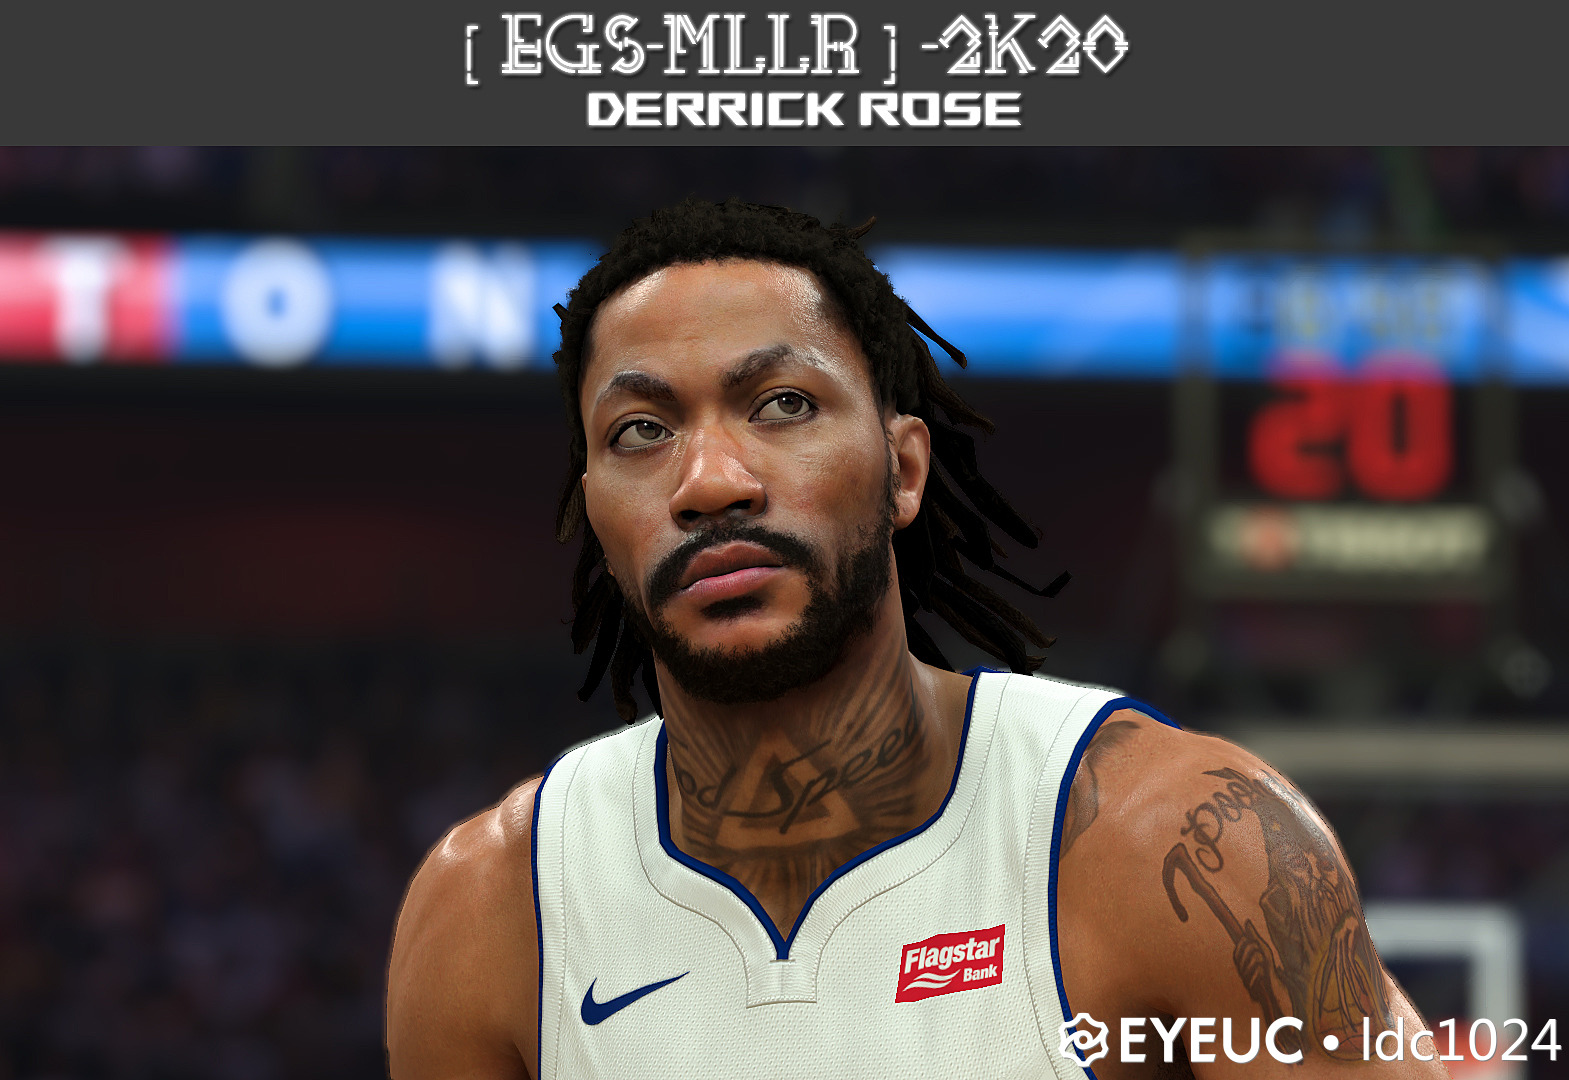 Derrick Rose HD Face and Body Model by EGS-MLLR [FOR 2K20] - NBA 2K Updates, Roster ...1569 x 1080